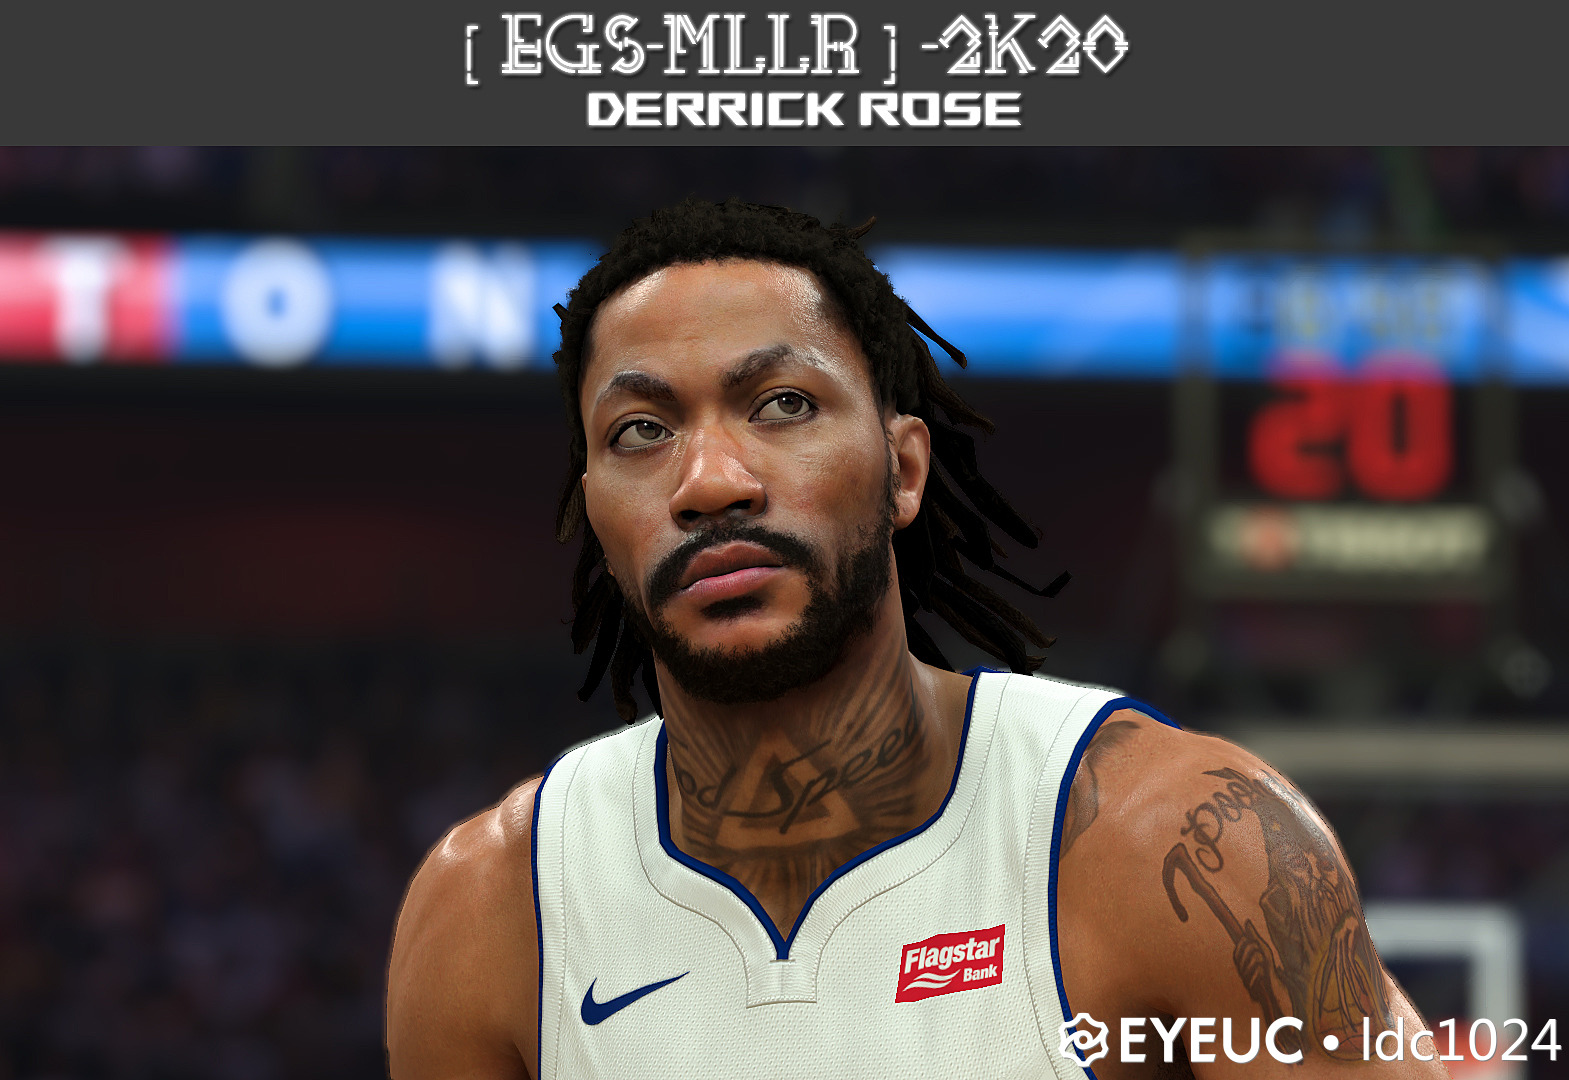 Derrick Rose HD Face and Body Model by EGS-MLLR [FOR 2K20] - NBA 2K Updates, Roster ...1569 x 1080